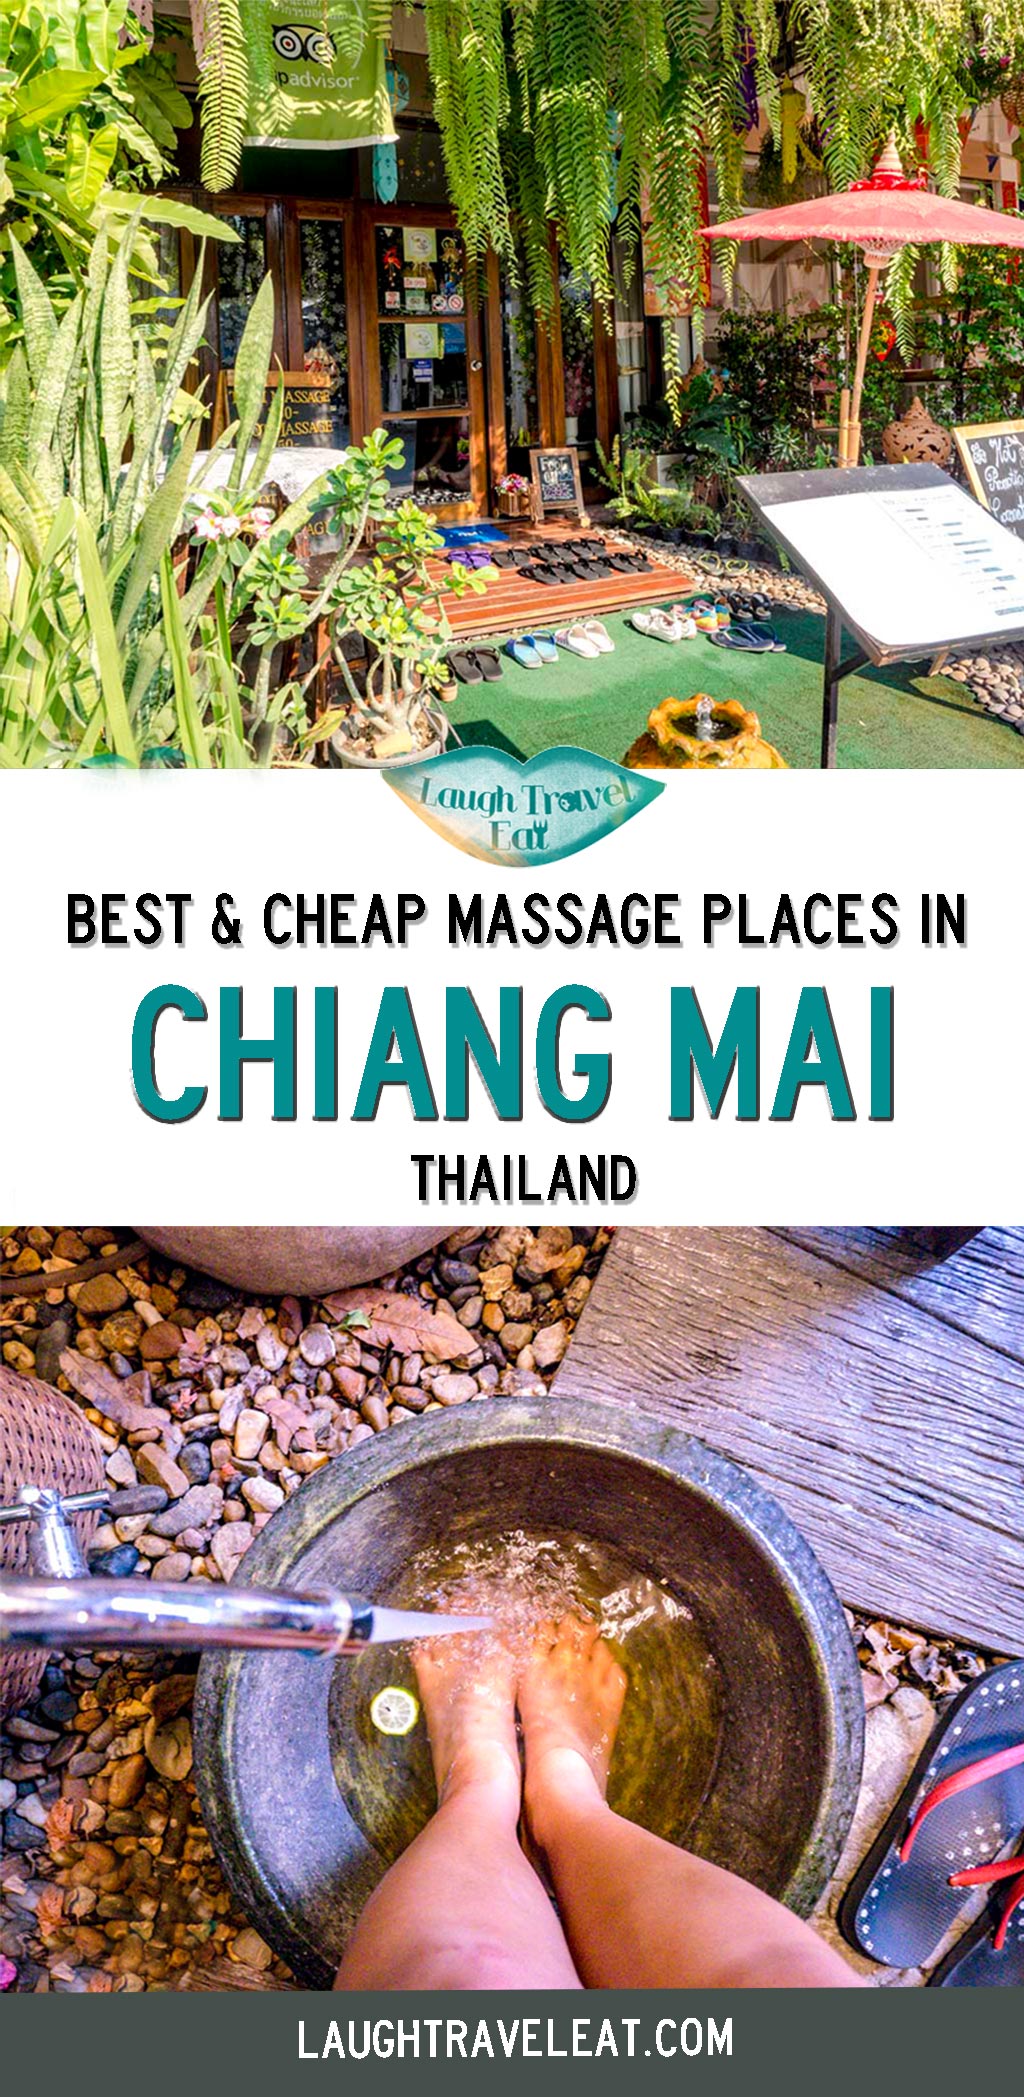 Thai Massage Chiang Mai Best And Cheap Places To Go